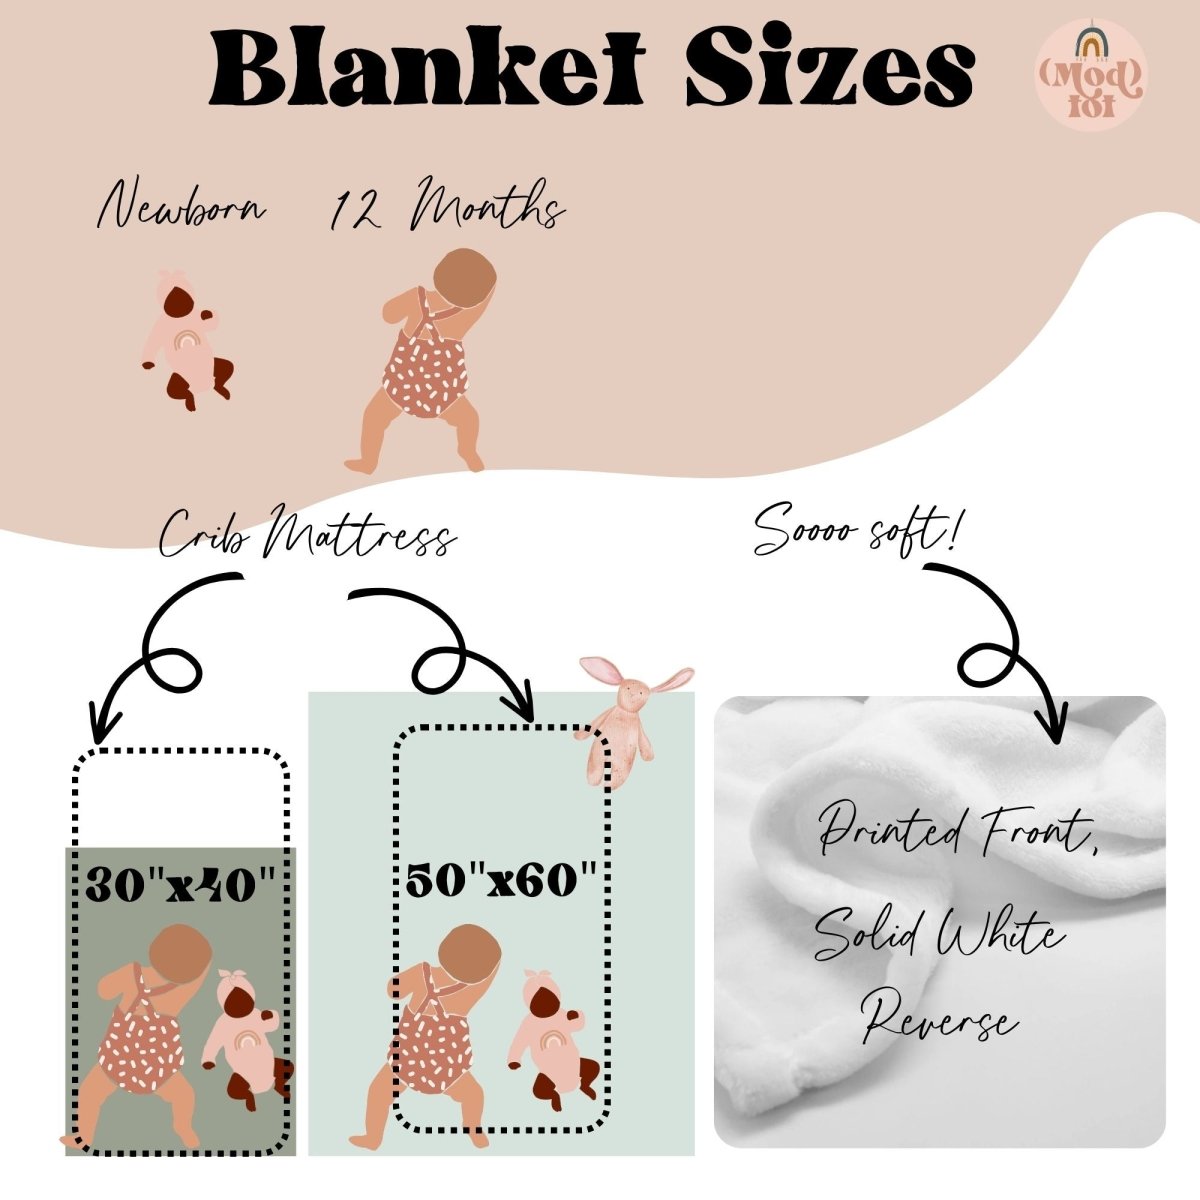 Woodland Meadows Minky Blanket - gender_girl, Personalized_No, Theme_Floral